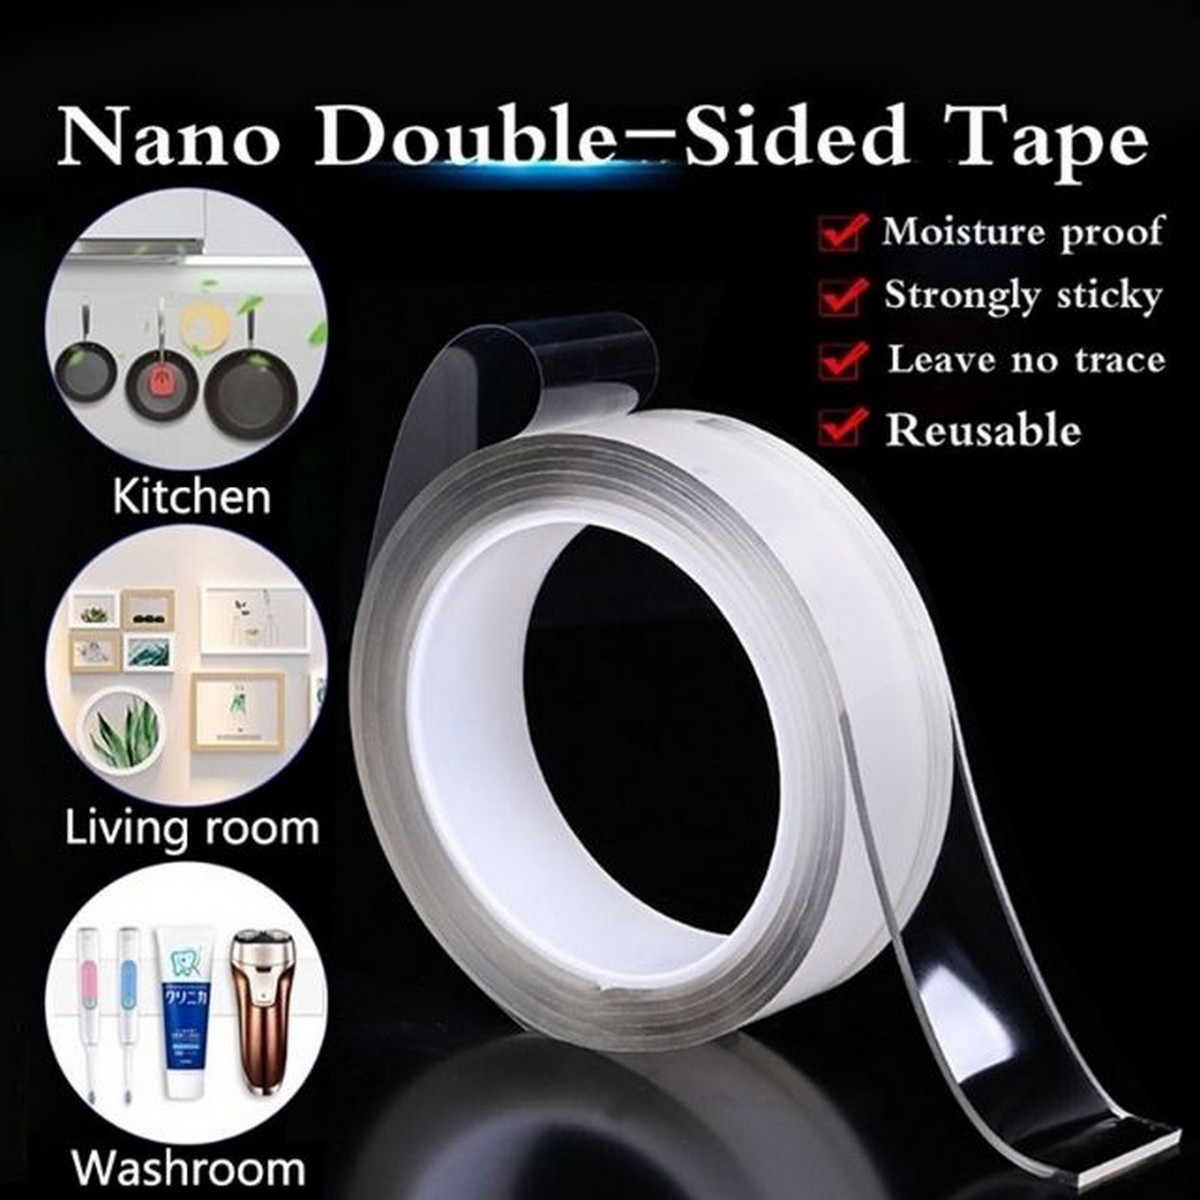 Nano Magic Tape Double Sided Tape Heavy Duty Adhesive Tape Washable Traceless Clear Tape Roll Transparent Strips Grip For Glass Metal Fix Carpet Mats Kitchen Cabinets Buy Online At Best Prices In